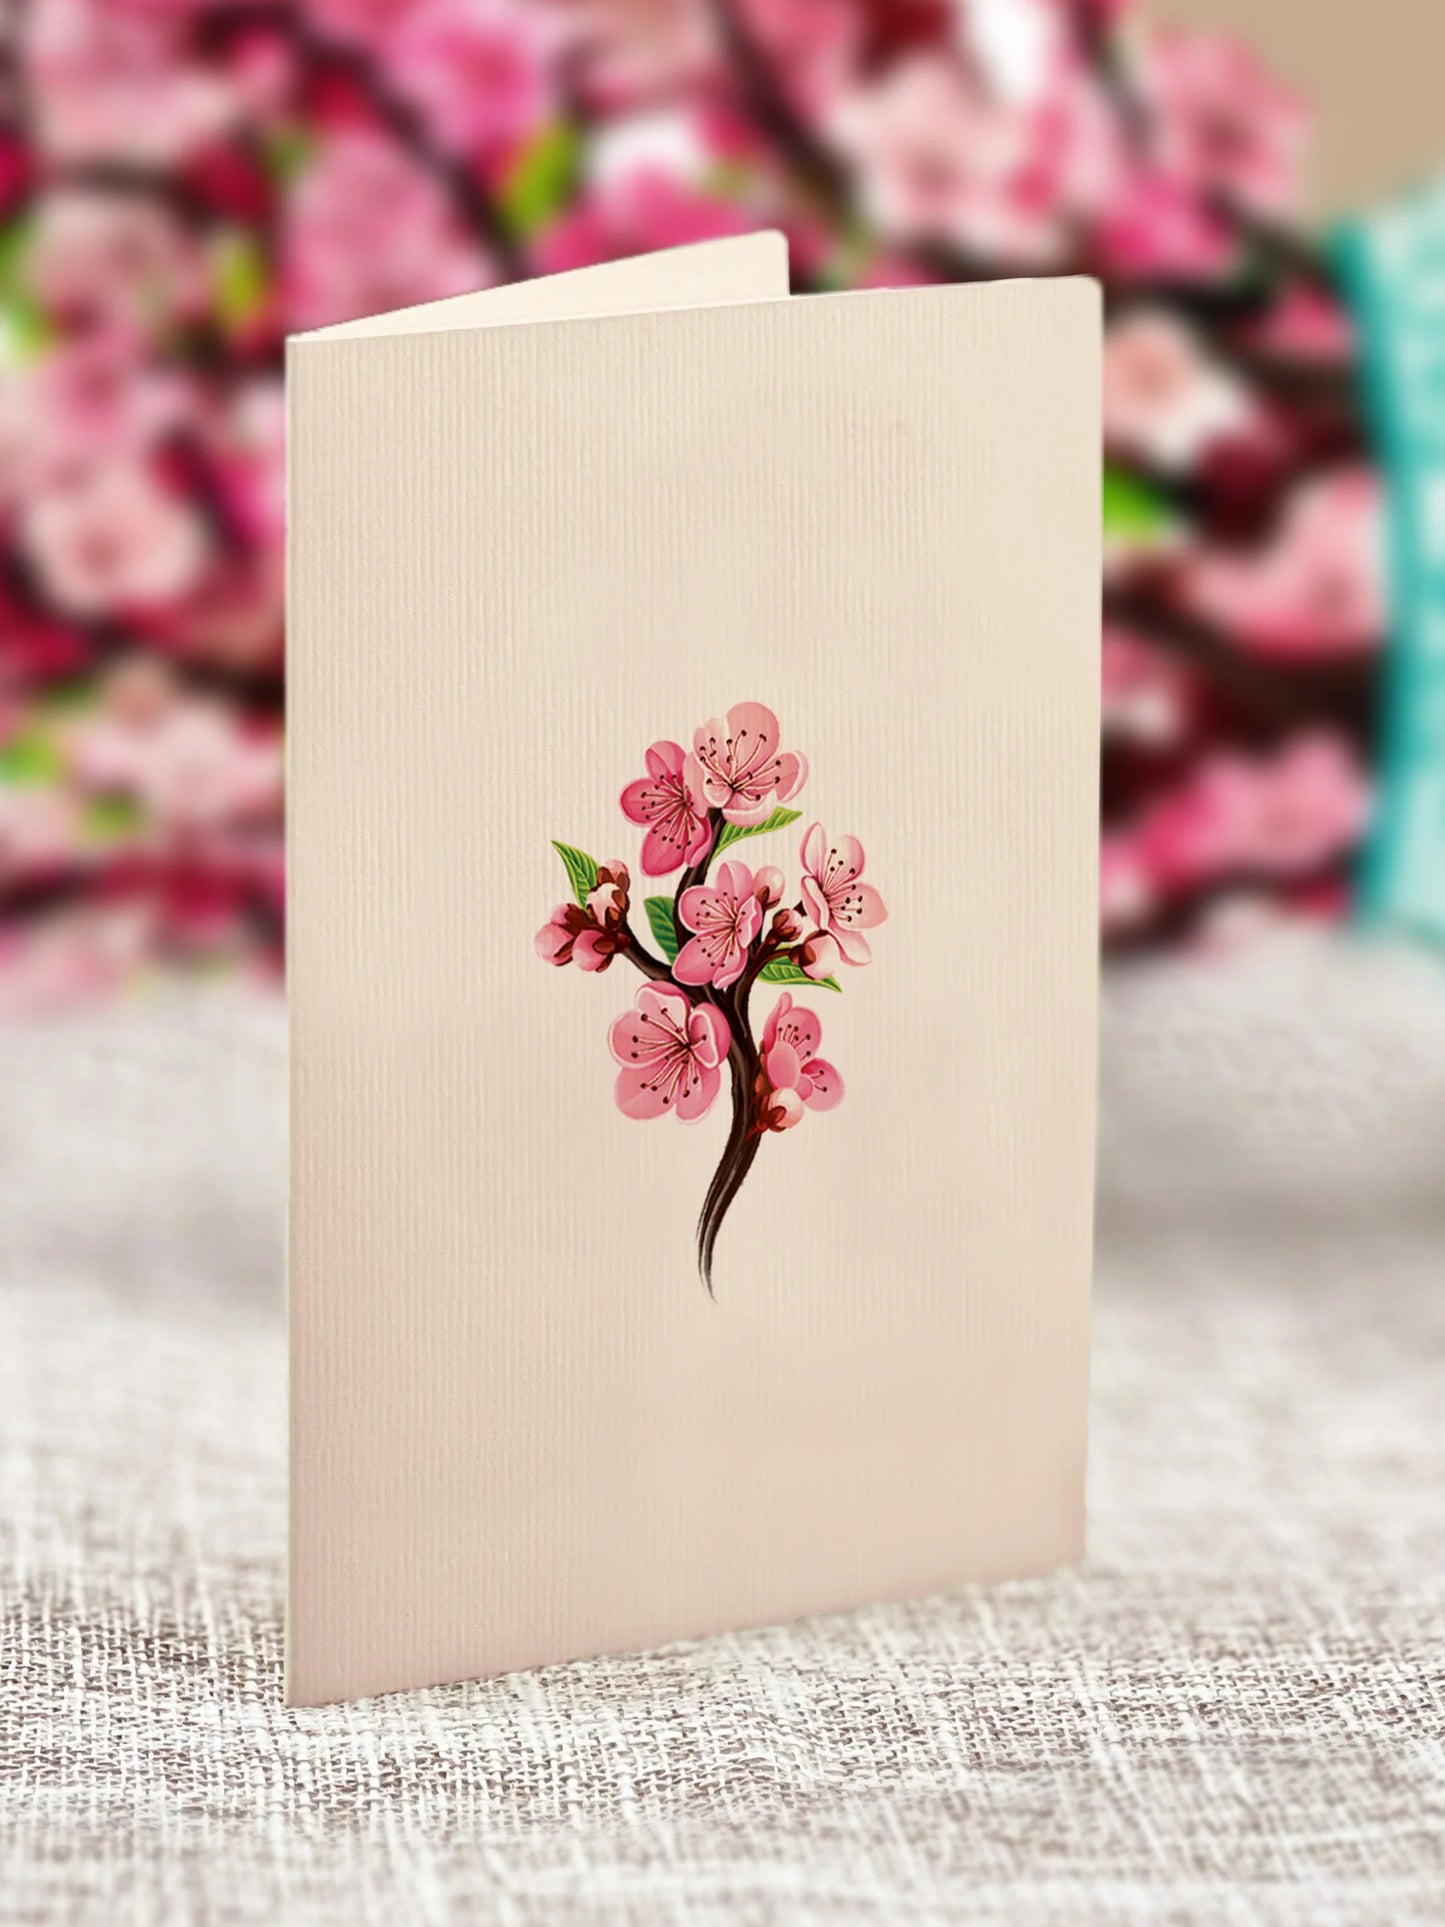 close-up of enclosure card with a sprig of cheery blossoms printed on it.